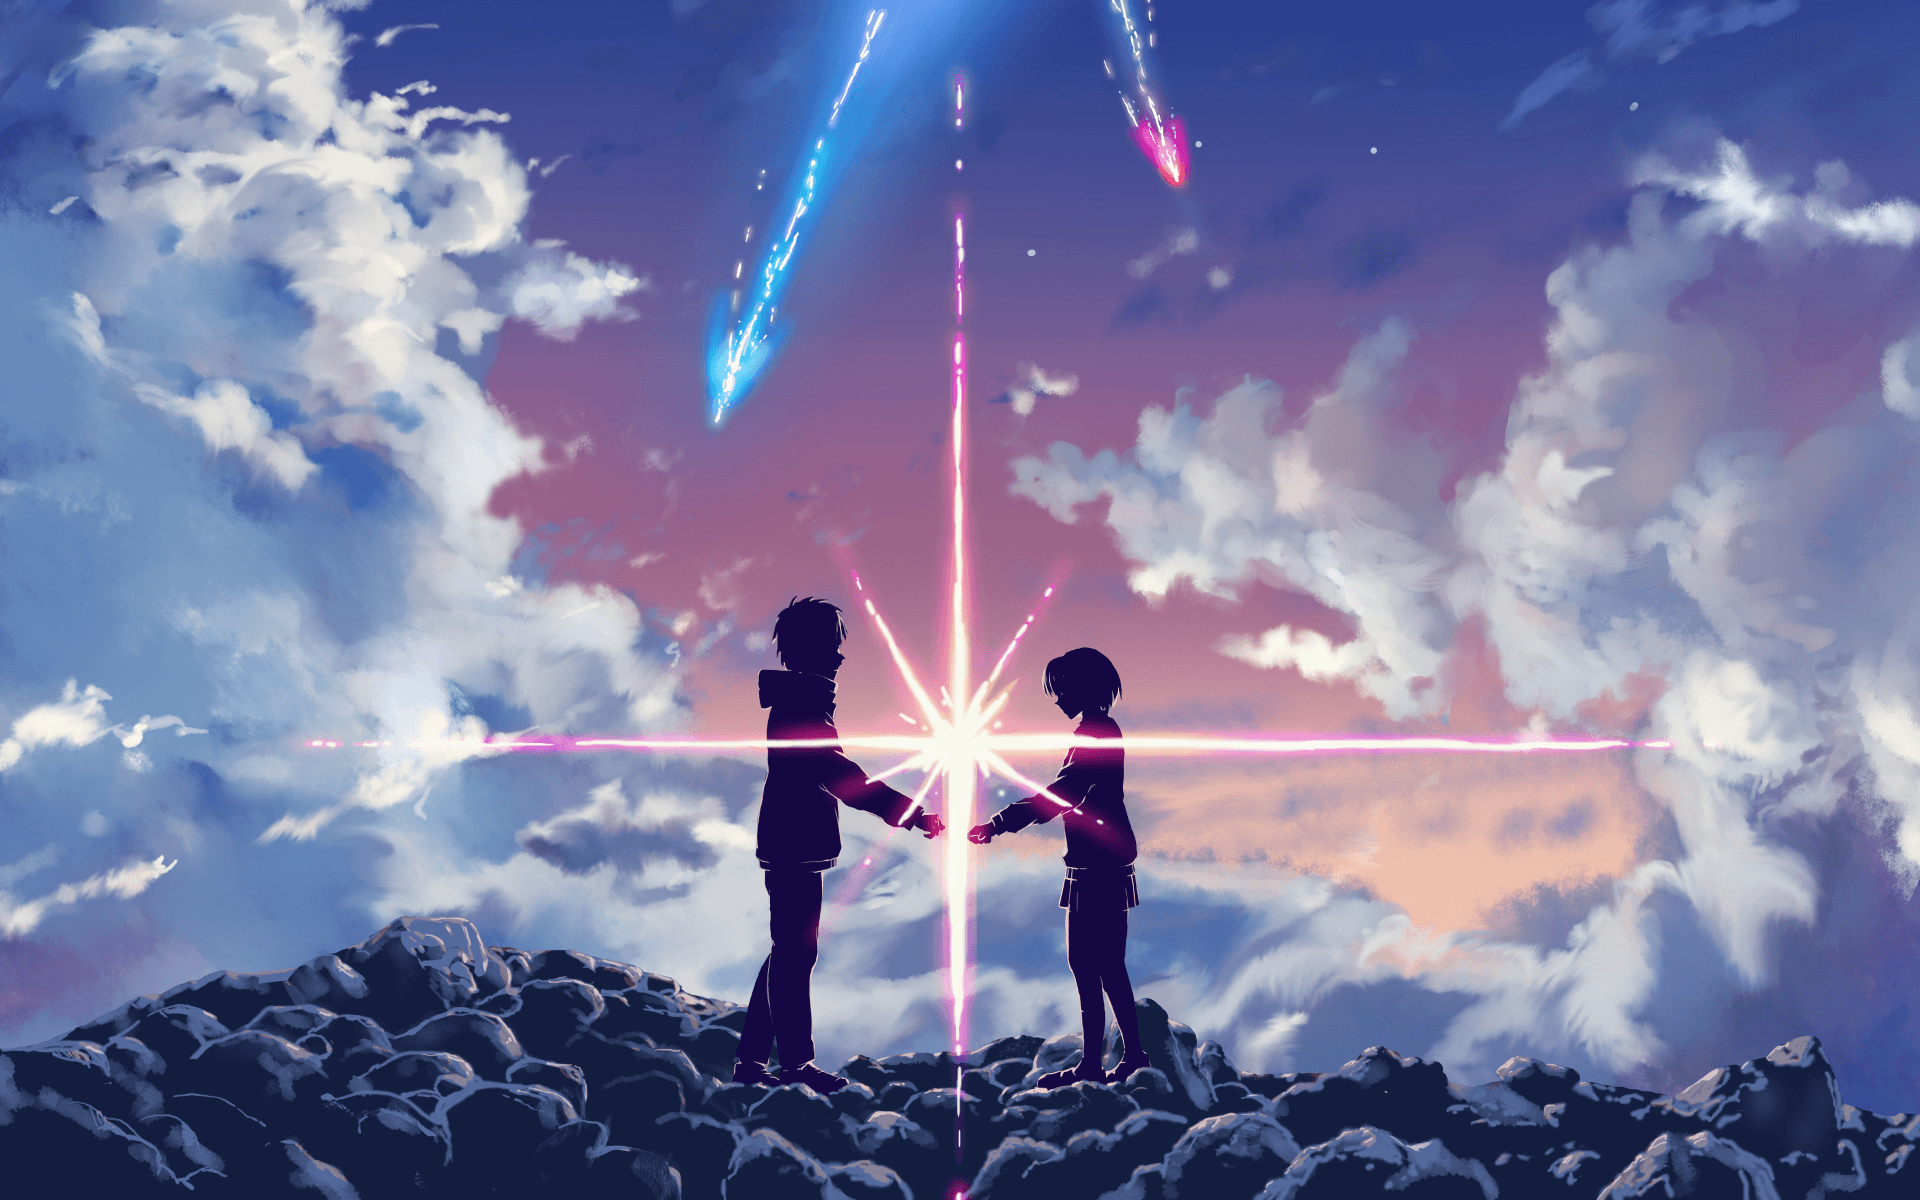 Your Name 4K Wallpaper Galore  Anime scenery, Kimi no na wa wallpaper,  Anime scenery wallpaper